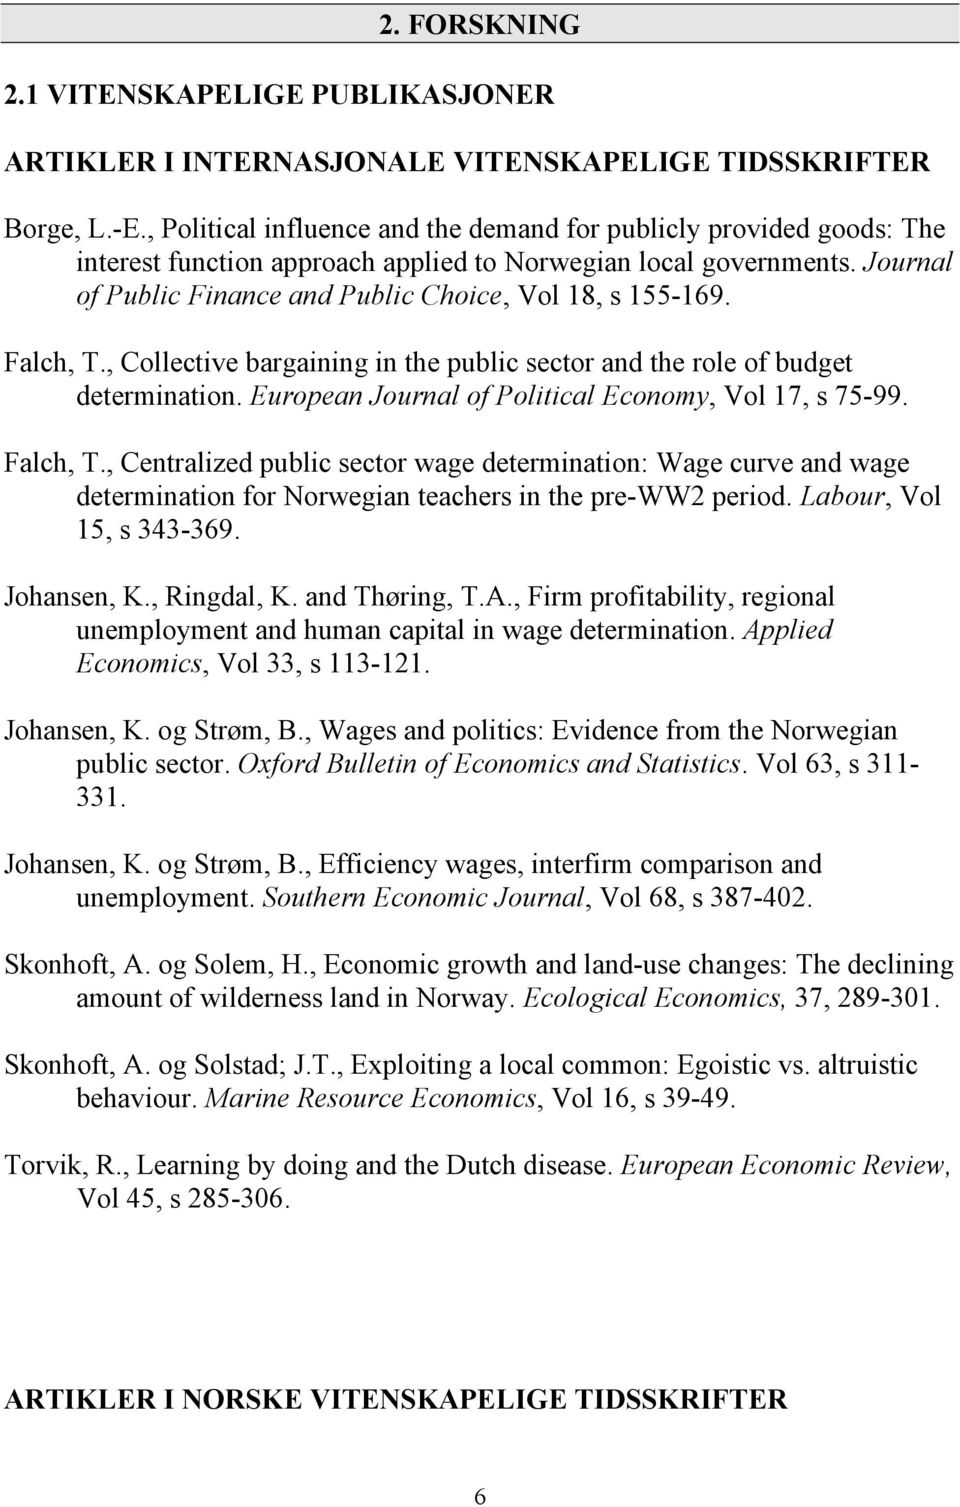 Falch, T., Collective bargaining in the public sector and the role of budget determination. European Journal of Political Economy, Vol 17, s 75-99. Falch, T.